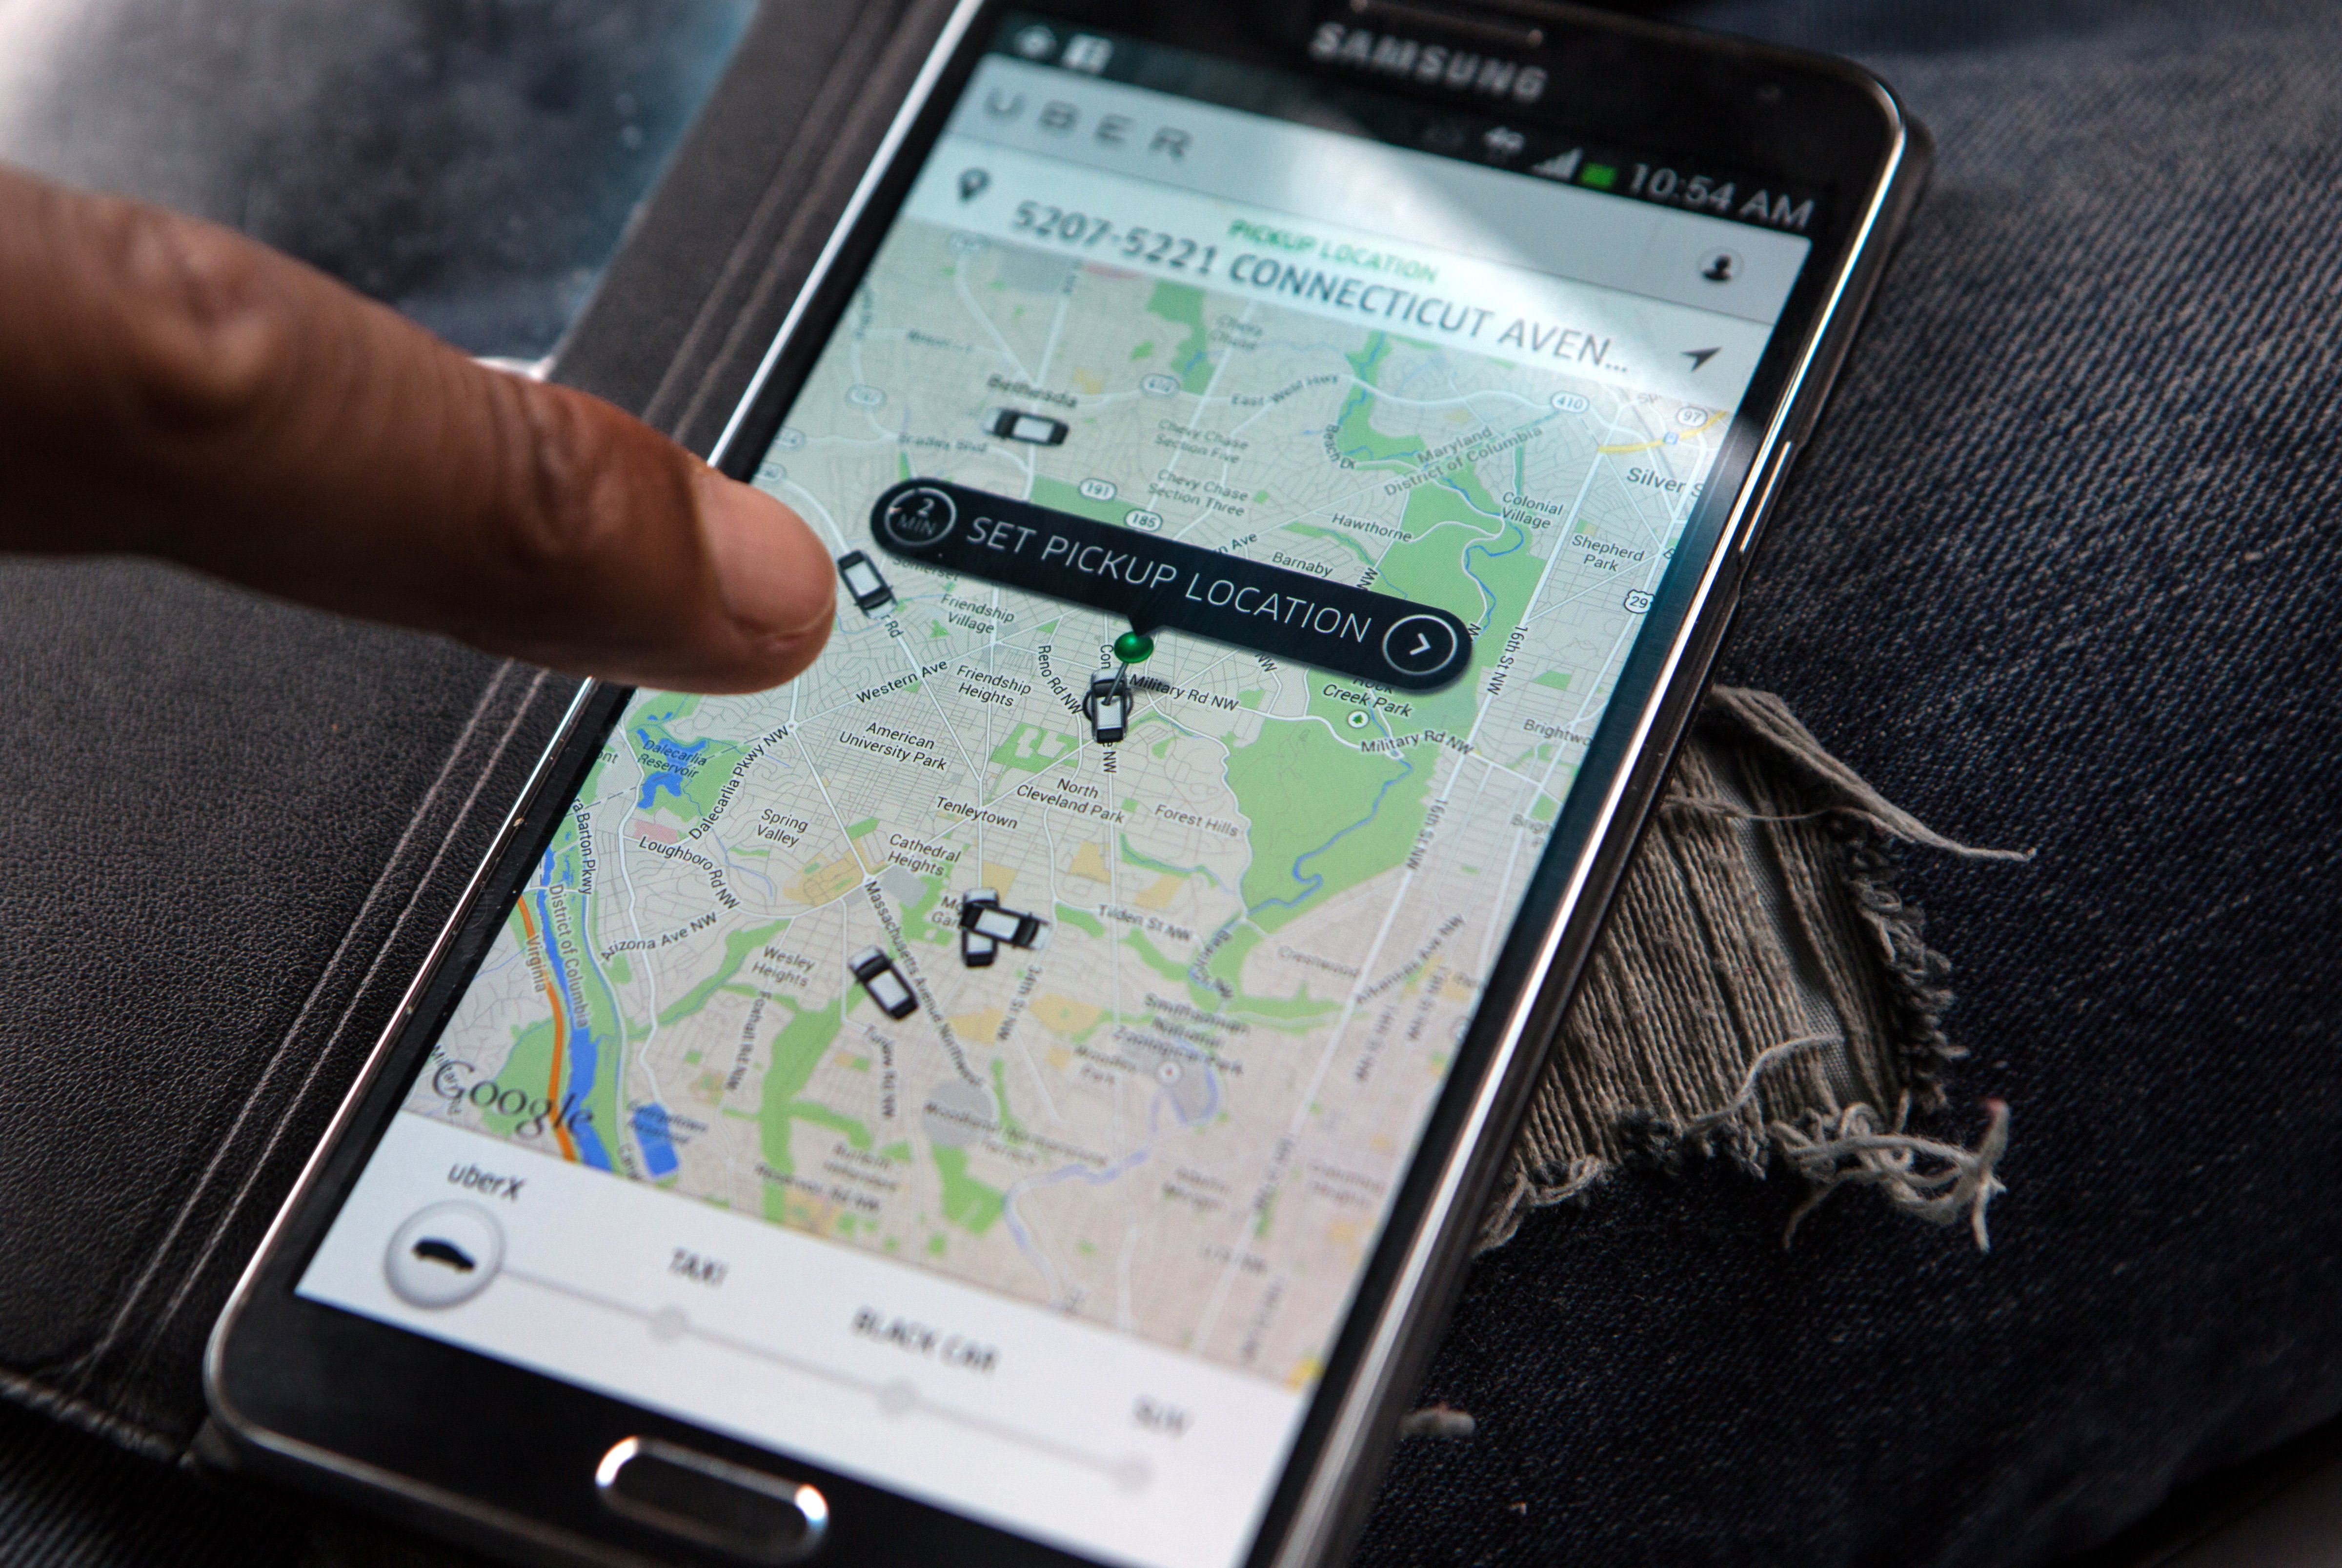 UberX driver, Michael Belet, checks the Uber customer app to see where other Uber drivers are working so he can determine where the best place for him to get fares might be, April 7, 2014, in Washington, D.C. (The Washington Post/Getty Images)